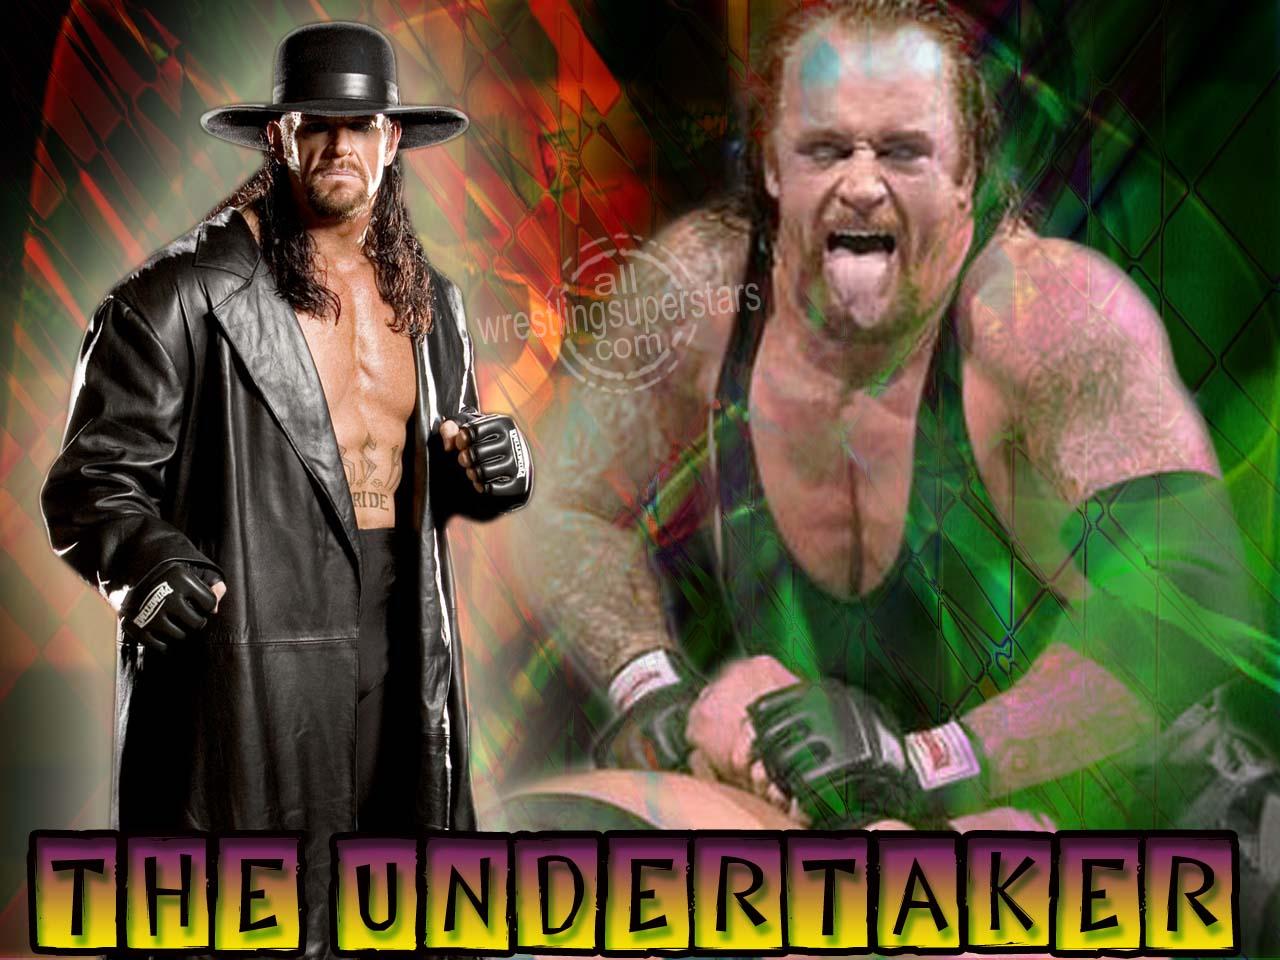 Brothers Kane And Undertaker Wrestler Image Pictures Wallpaper